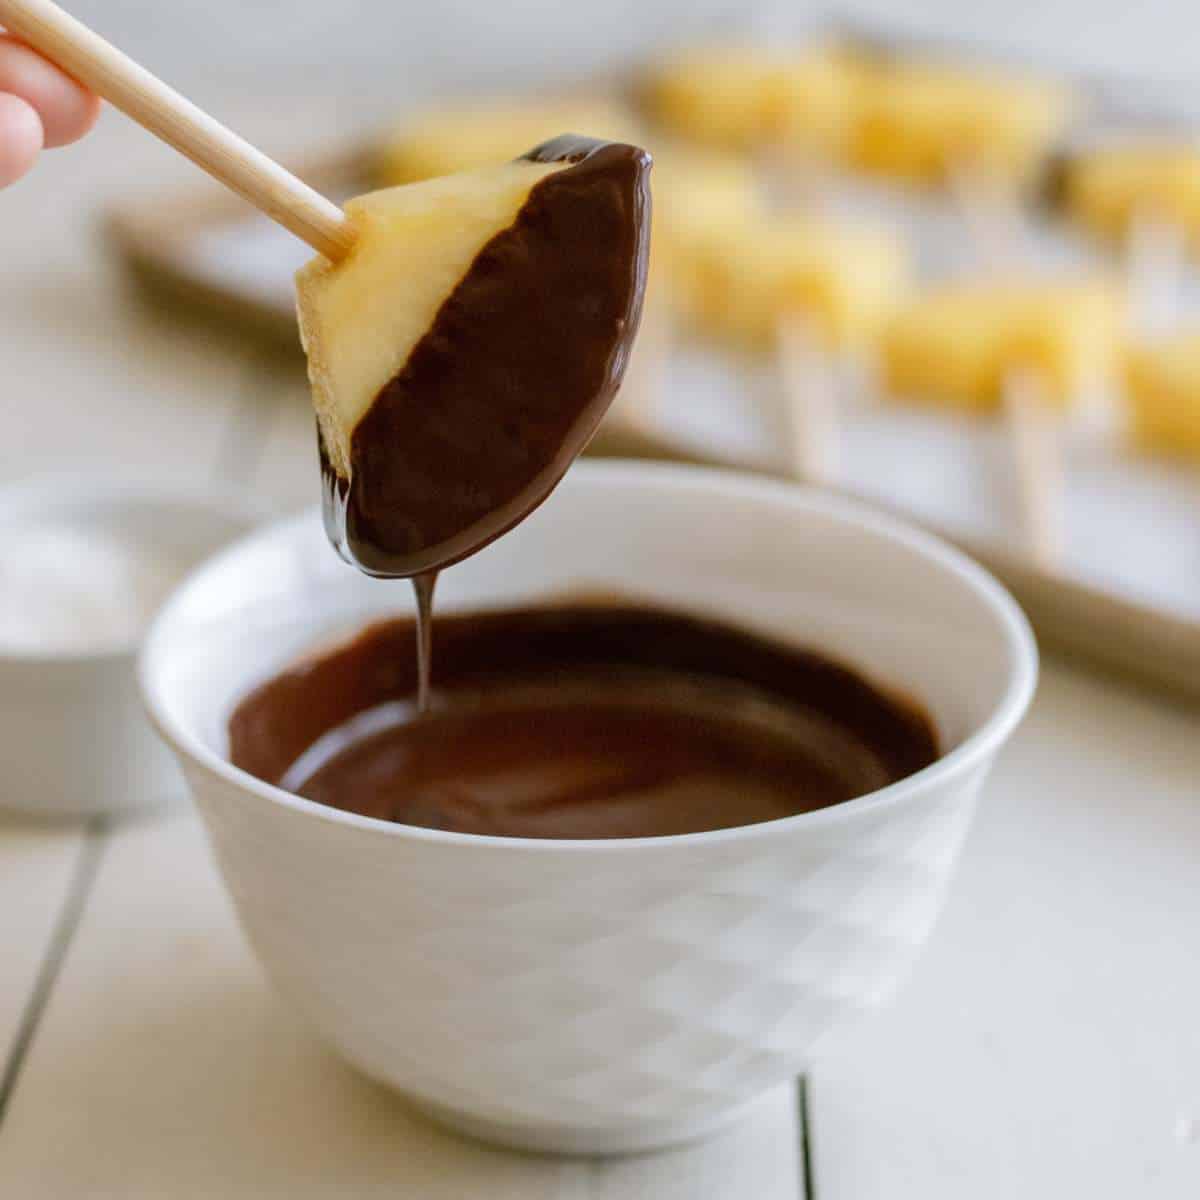 Recipe step 3, dip the wedges into the melted chocolate.